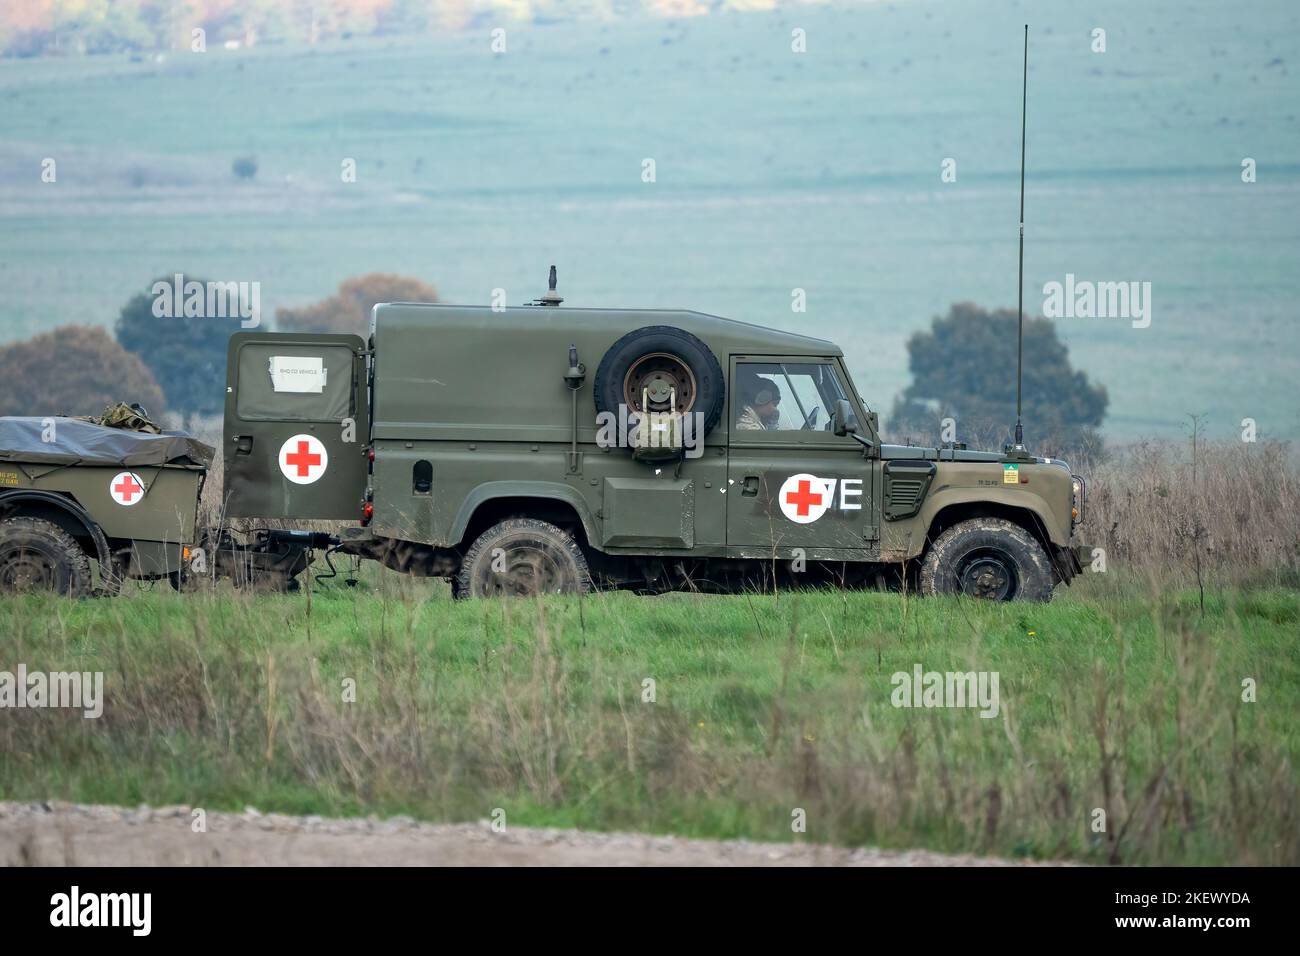 British army Land Rover Defender Wolf ambulance with trailer on a military exercise, Wiltshire UK Stock Photo